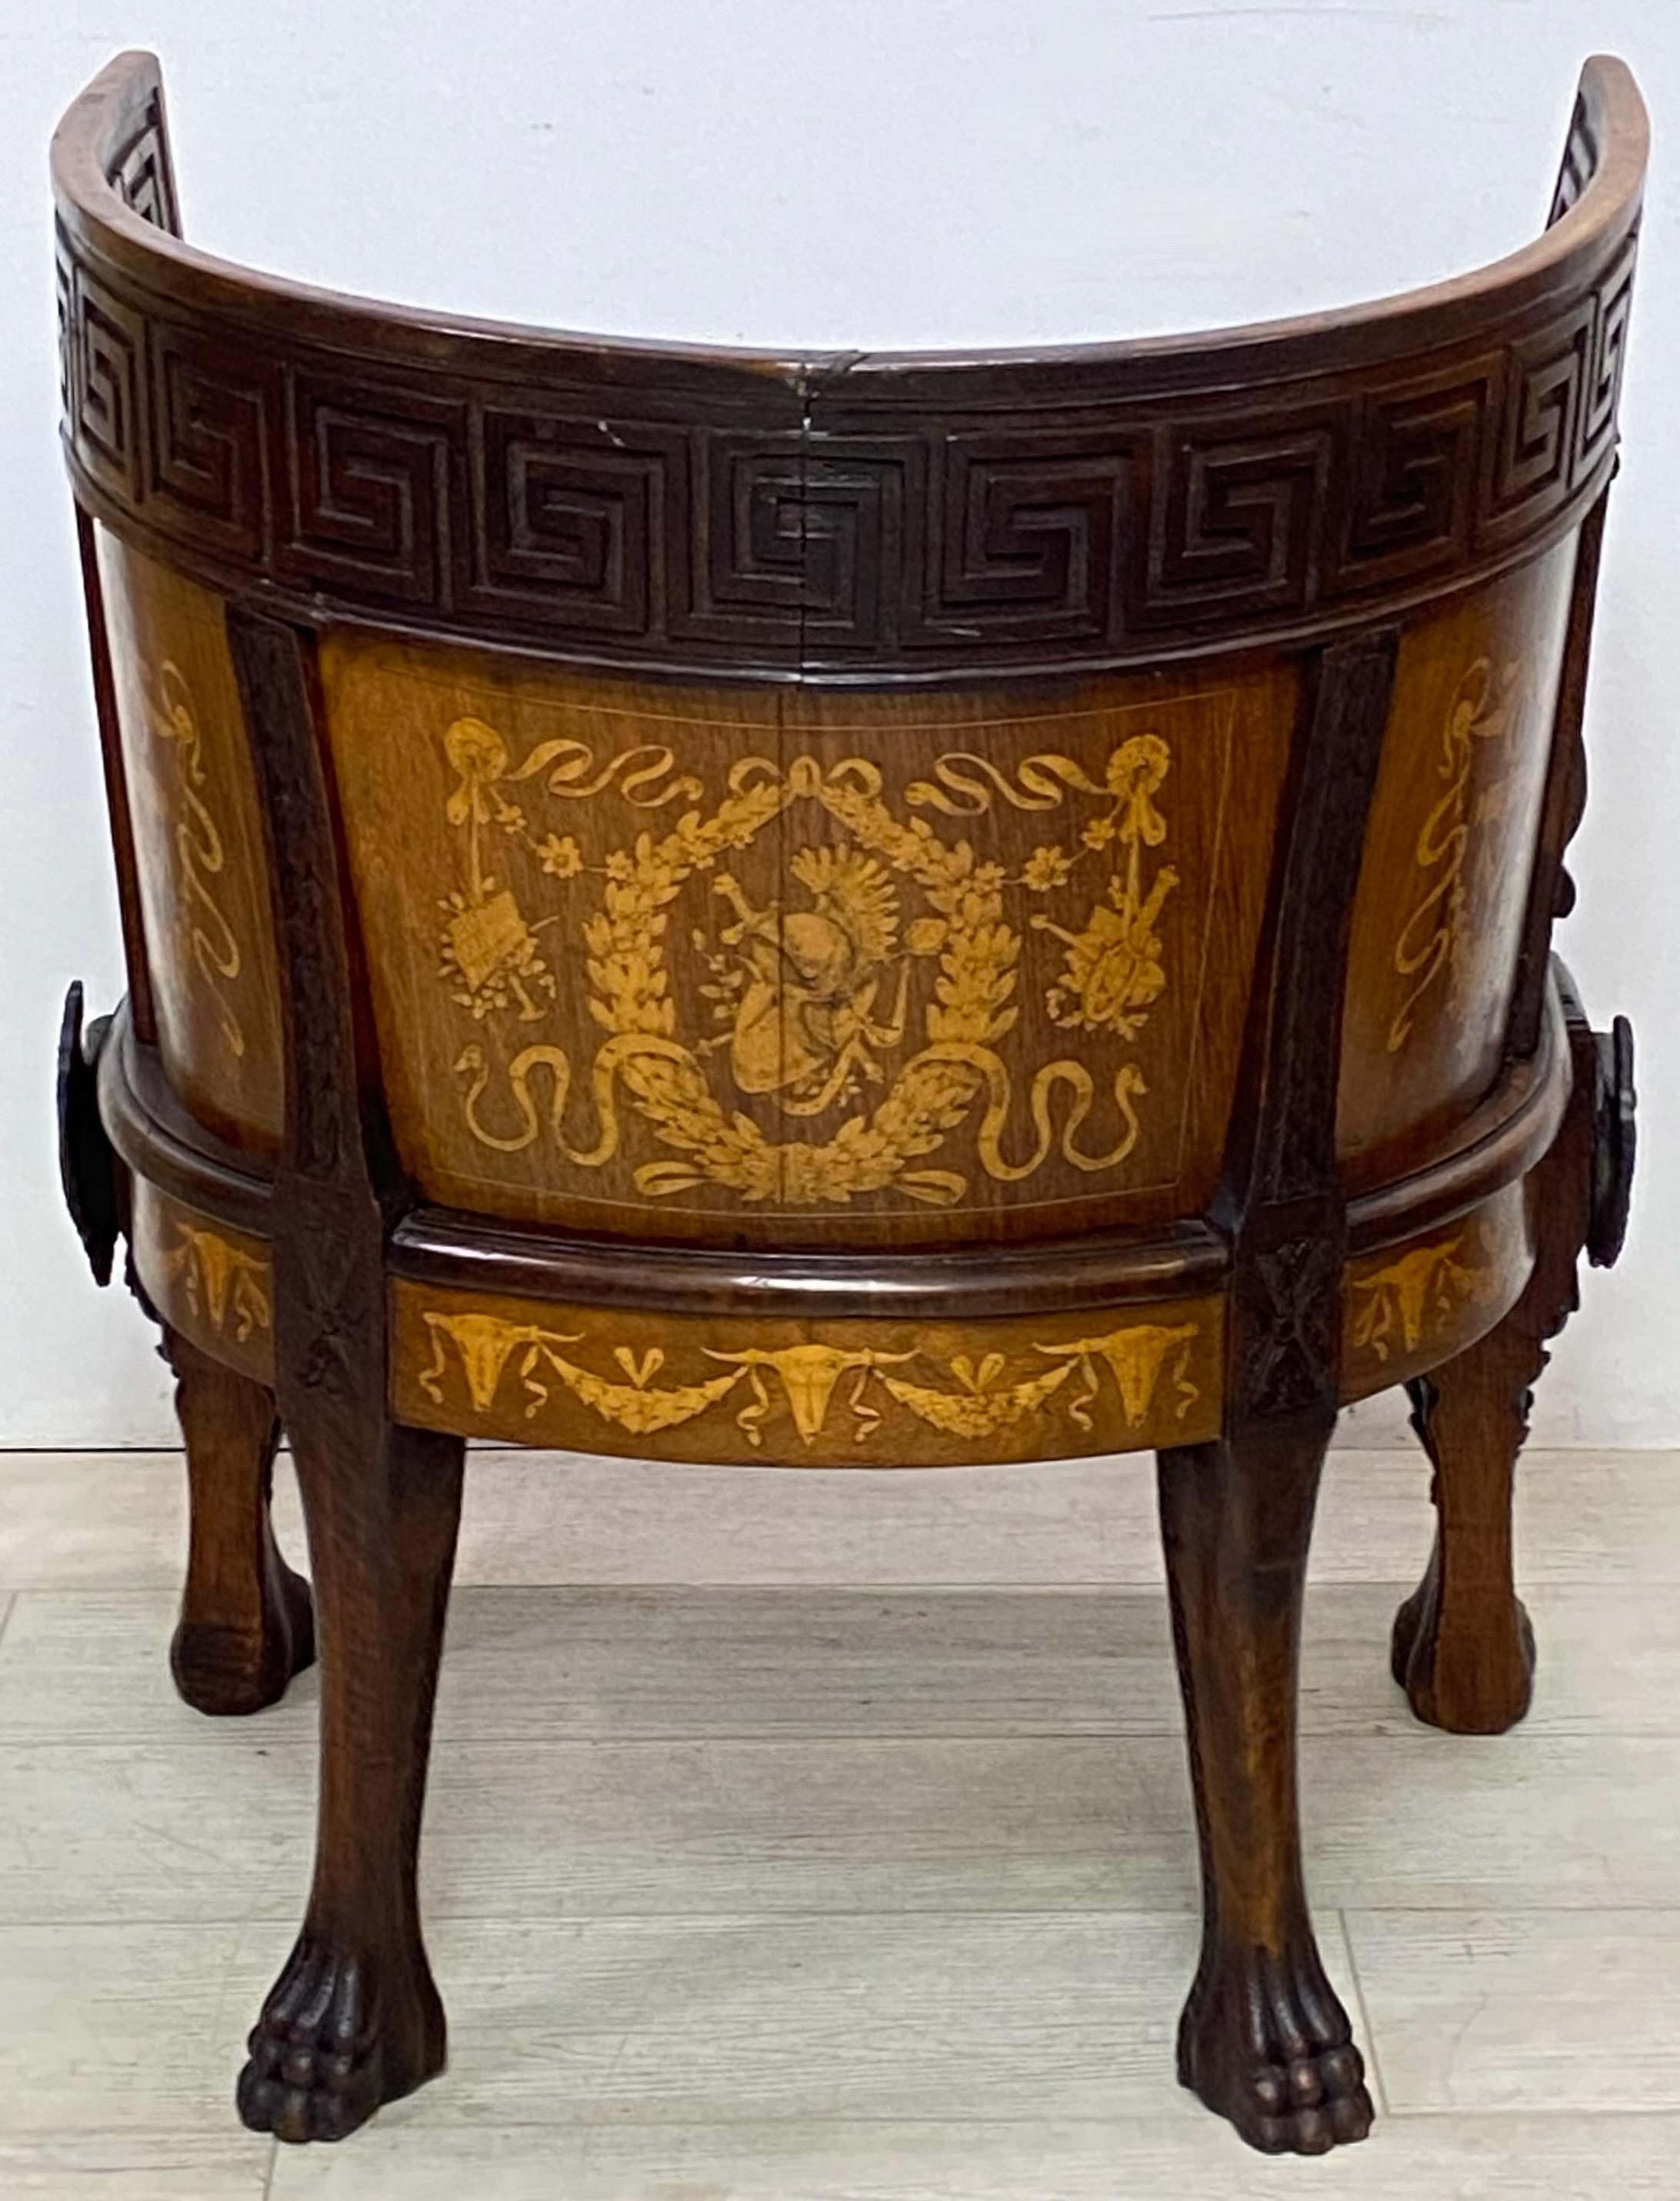 Neoclassical Revival Grand Tour Period Walnut Chair, Italian 19th Century For Sale 1